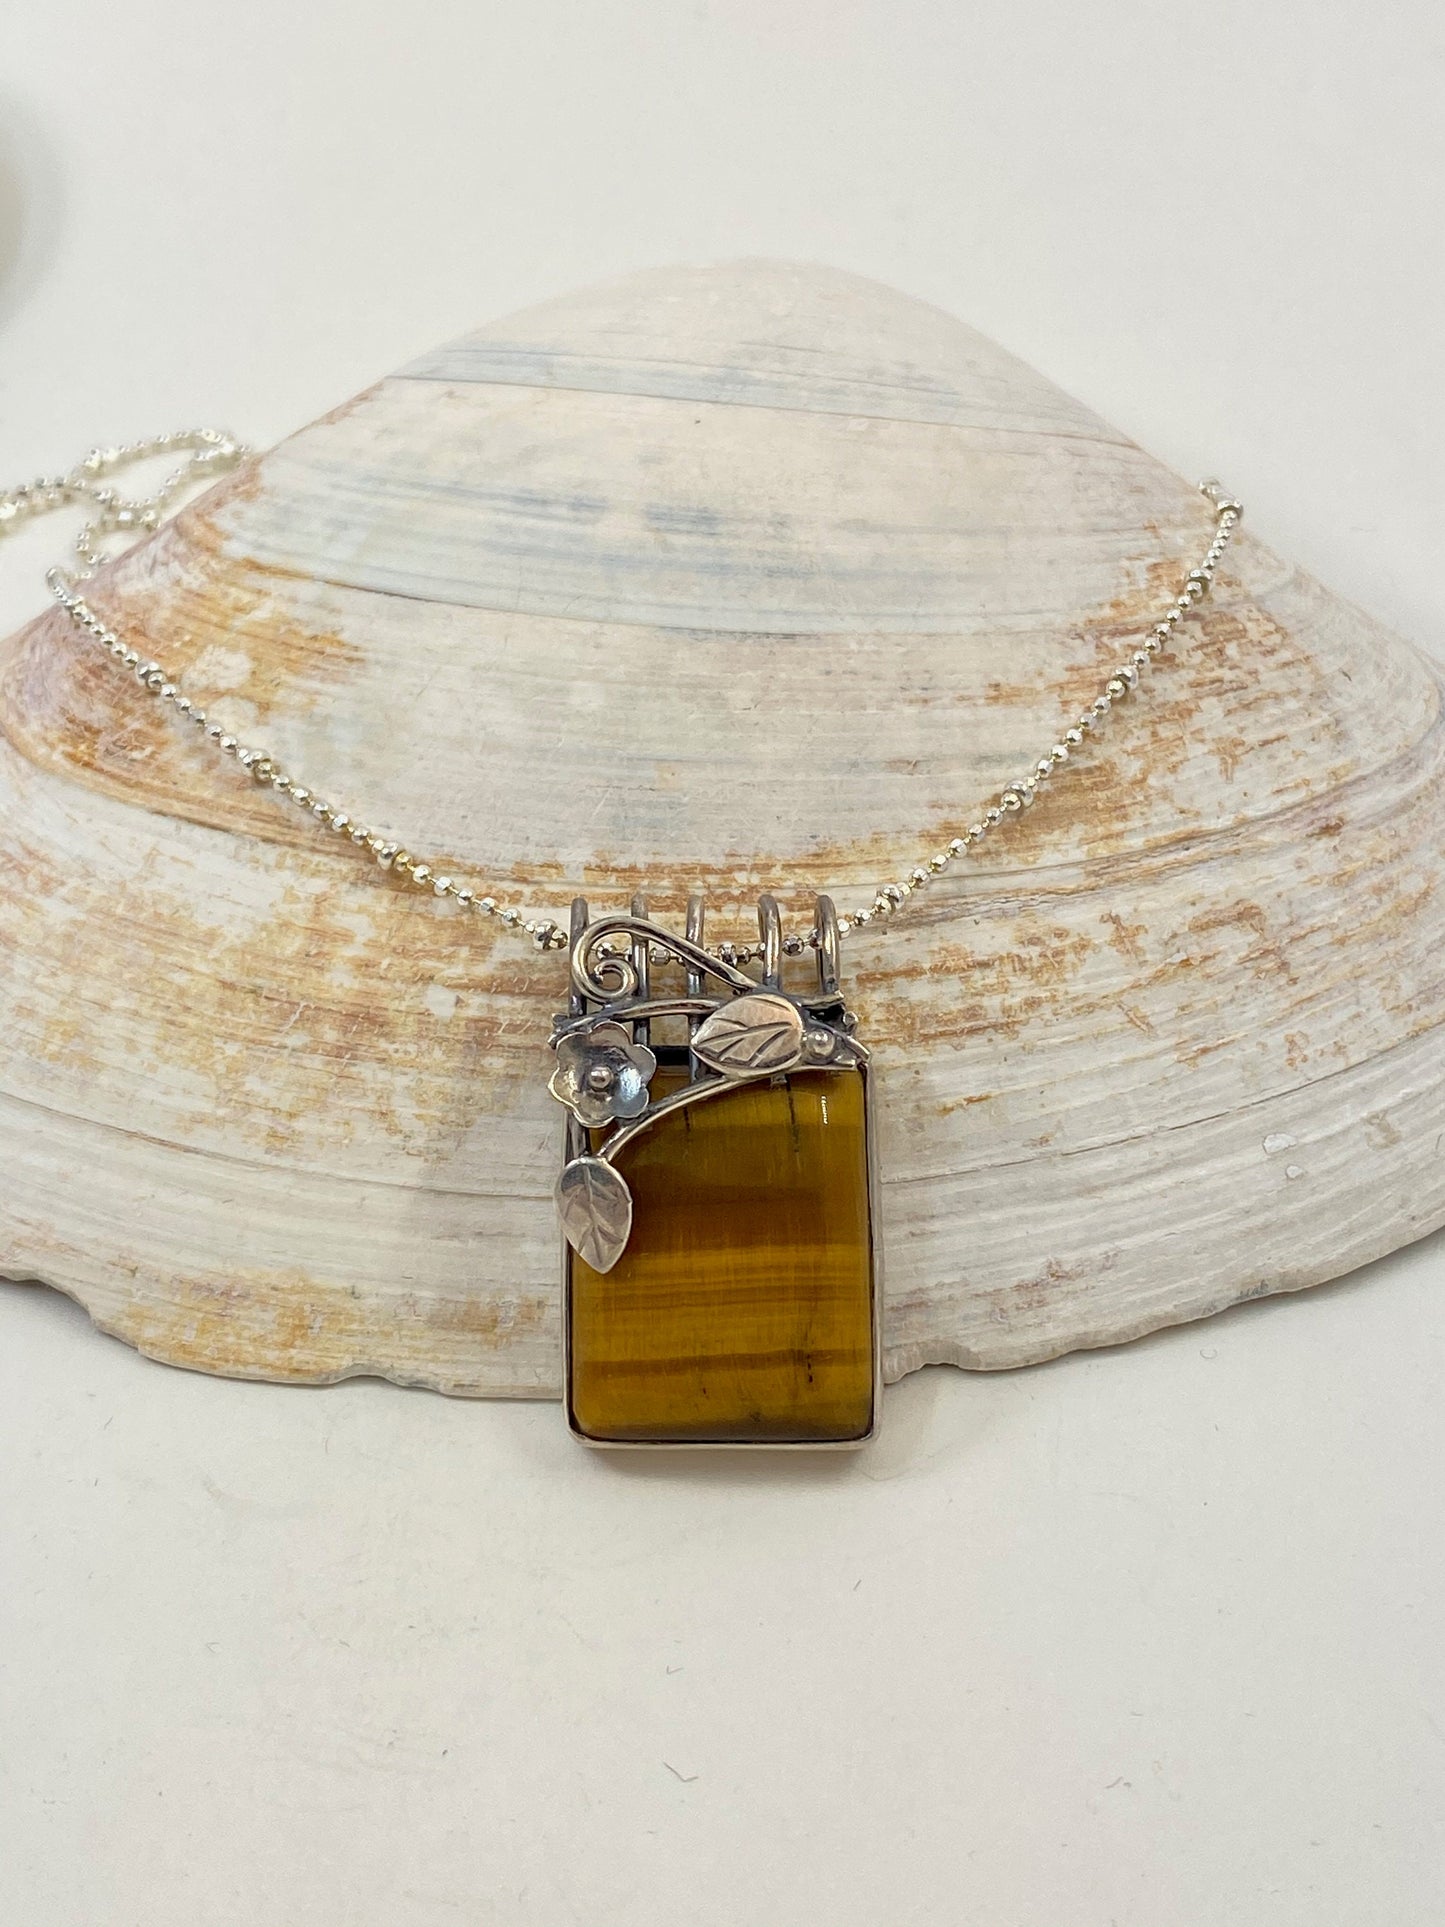 Gemstone pendant. Tigereye stone is strung on a beautiful sterling silver chain. Gift for women, birthday gift, gift for all!